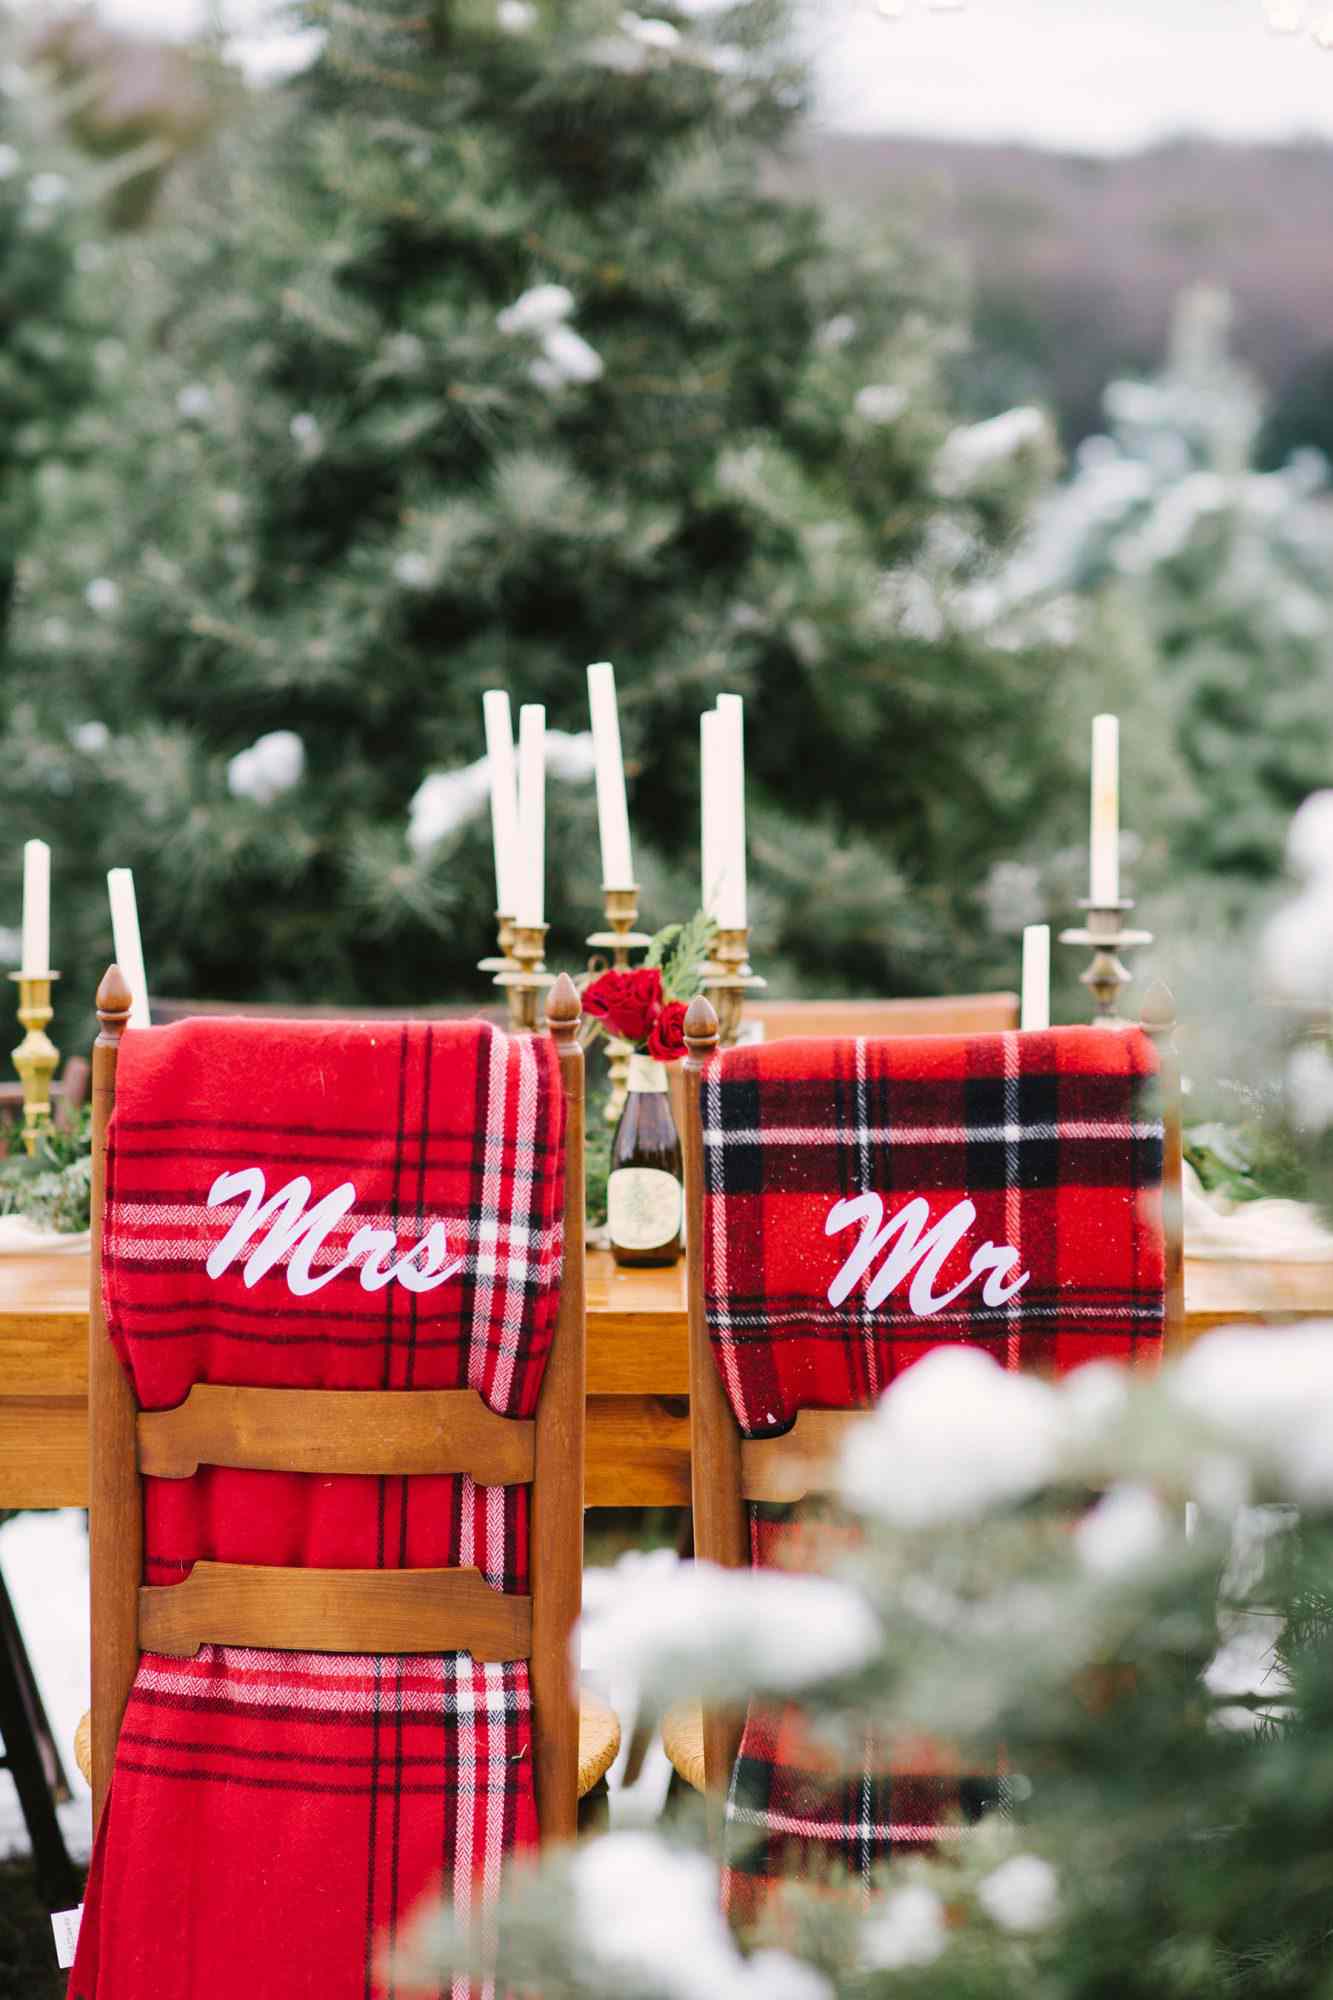 Chair Decor Mr. and Mrs. Blankets